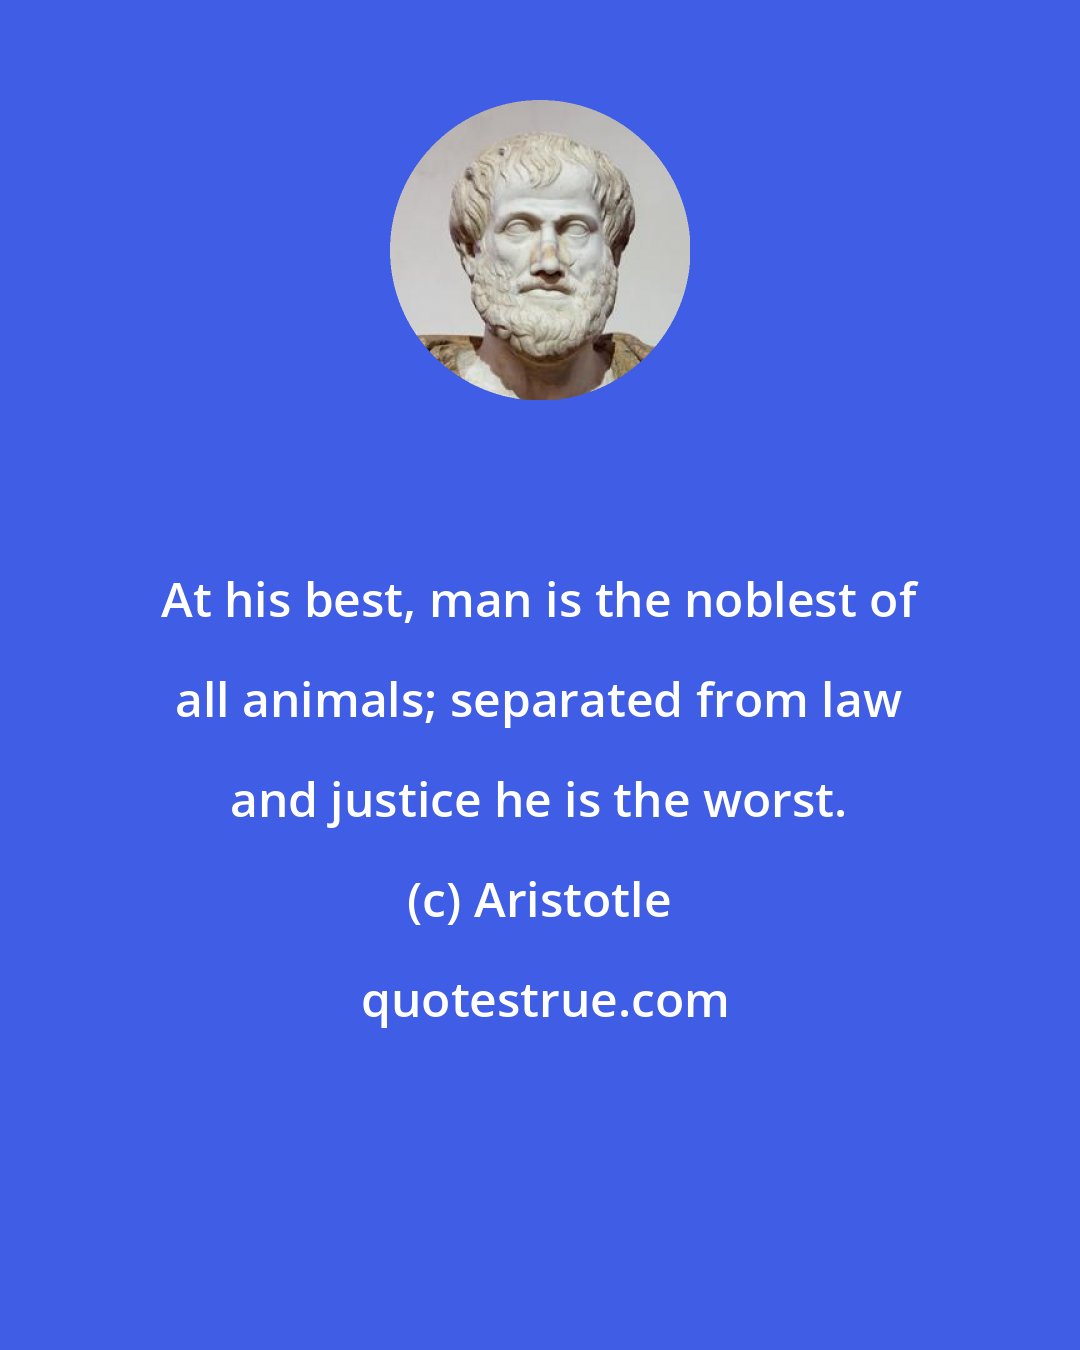 Aristotle: At his best, man is the noblest of all animals; separated from law and justice he is the worst.